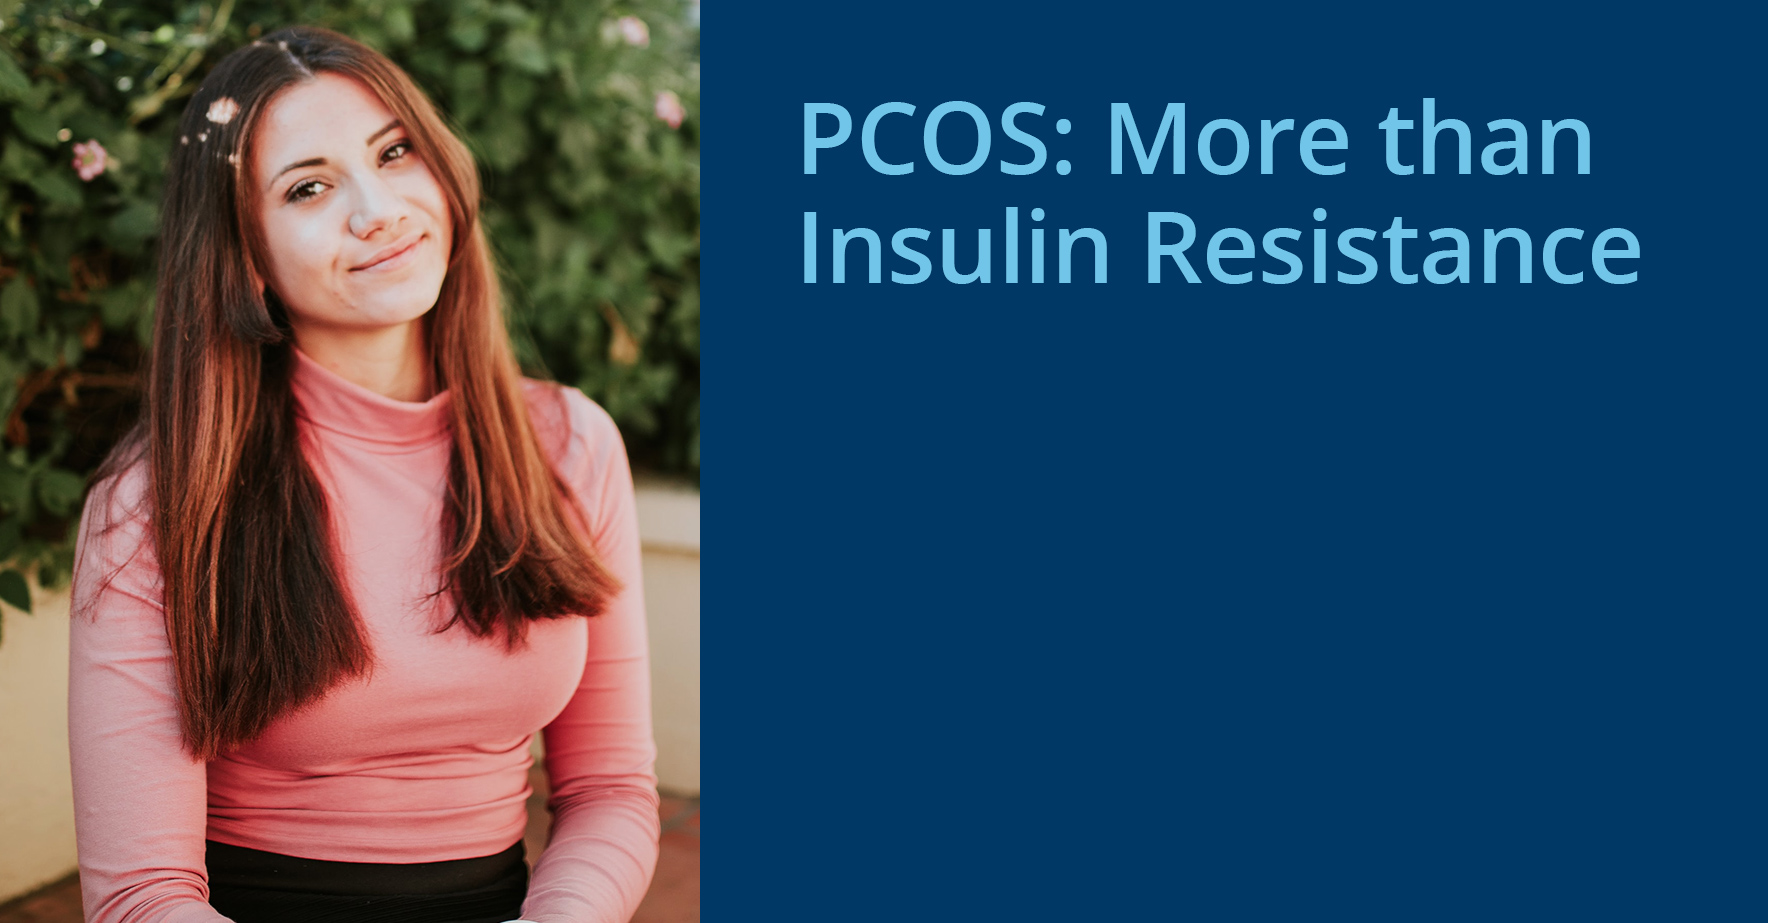 pcos_more_than_insulin_resistance.jpg.